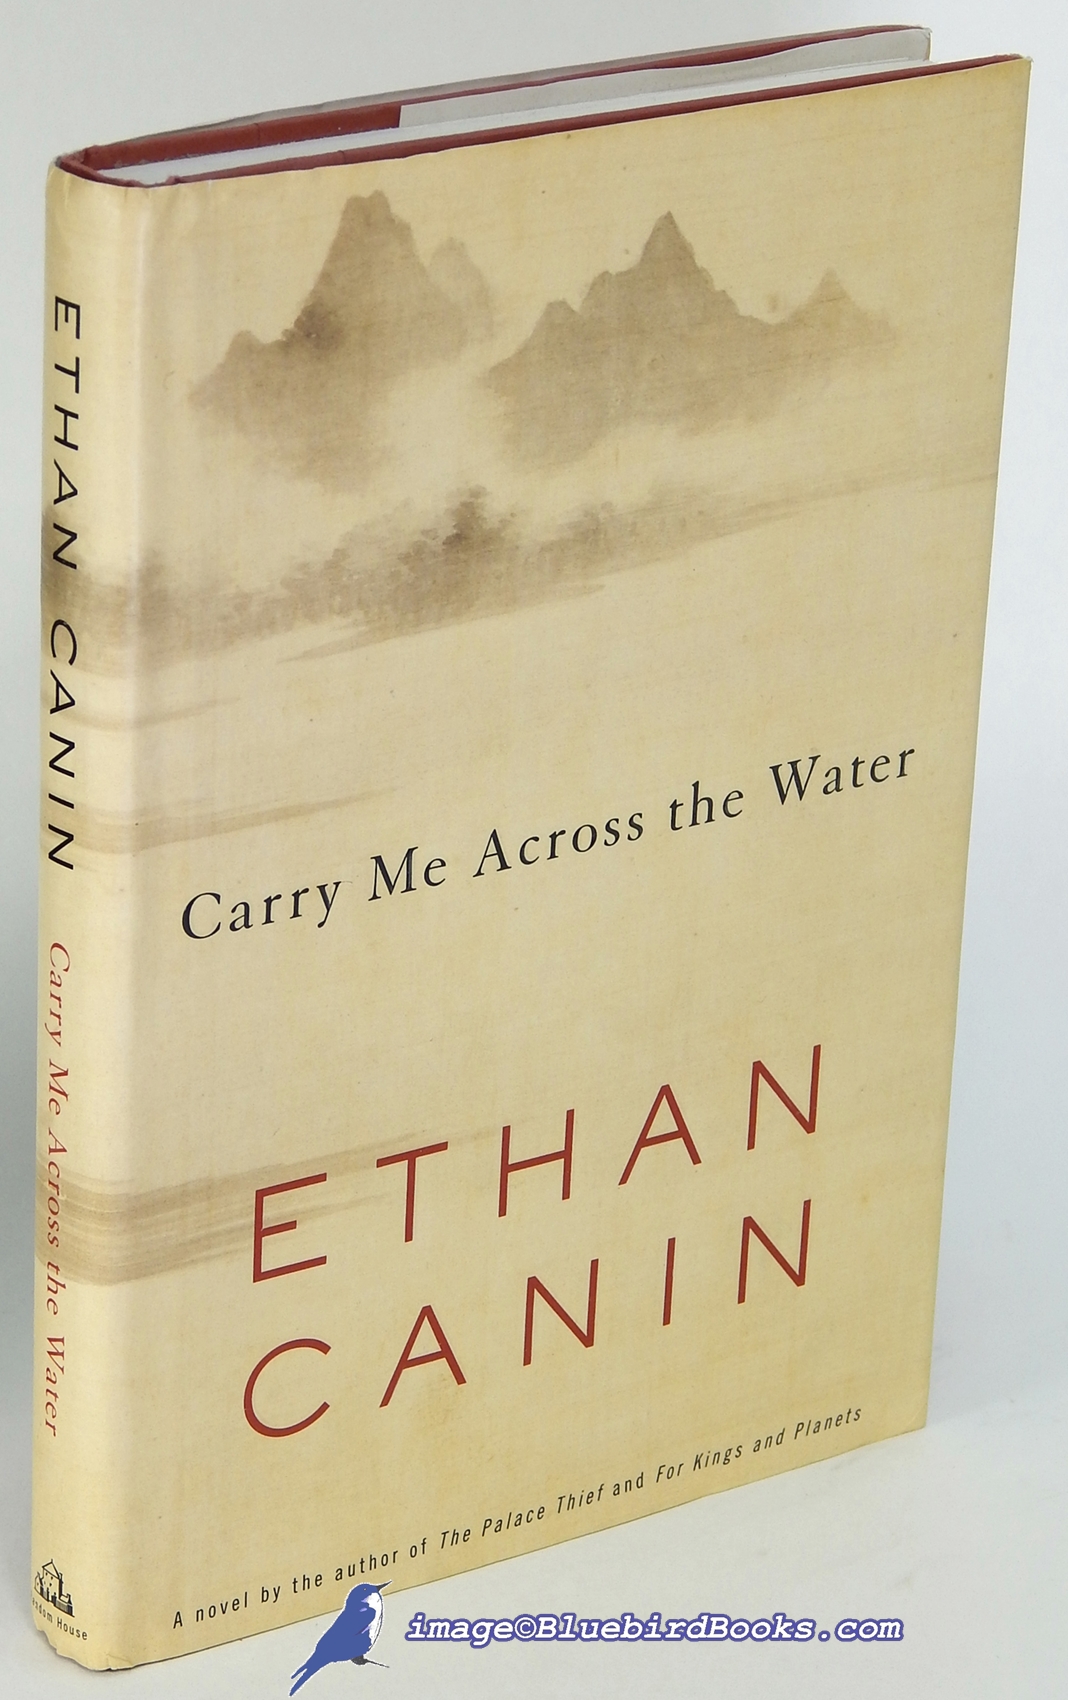 CANIN, ETHAN - Carry Me Across the Water